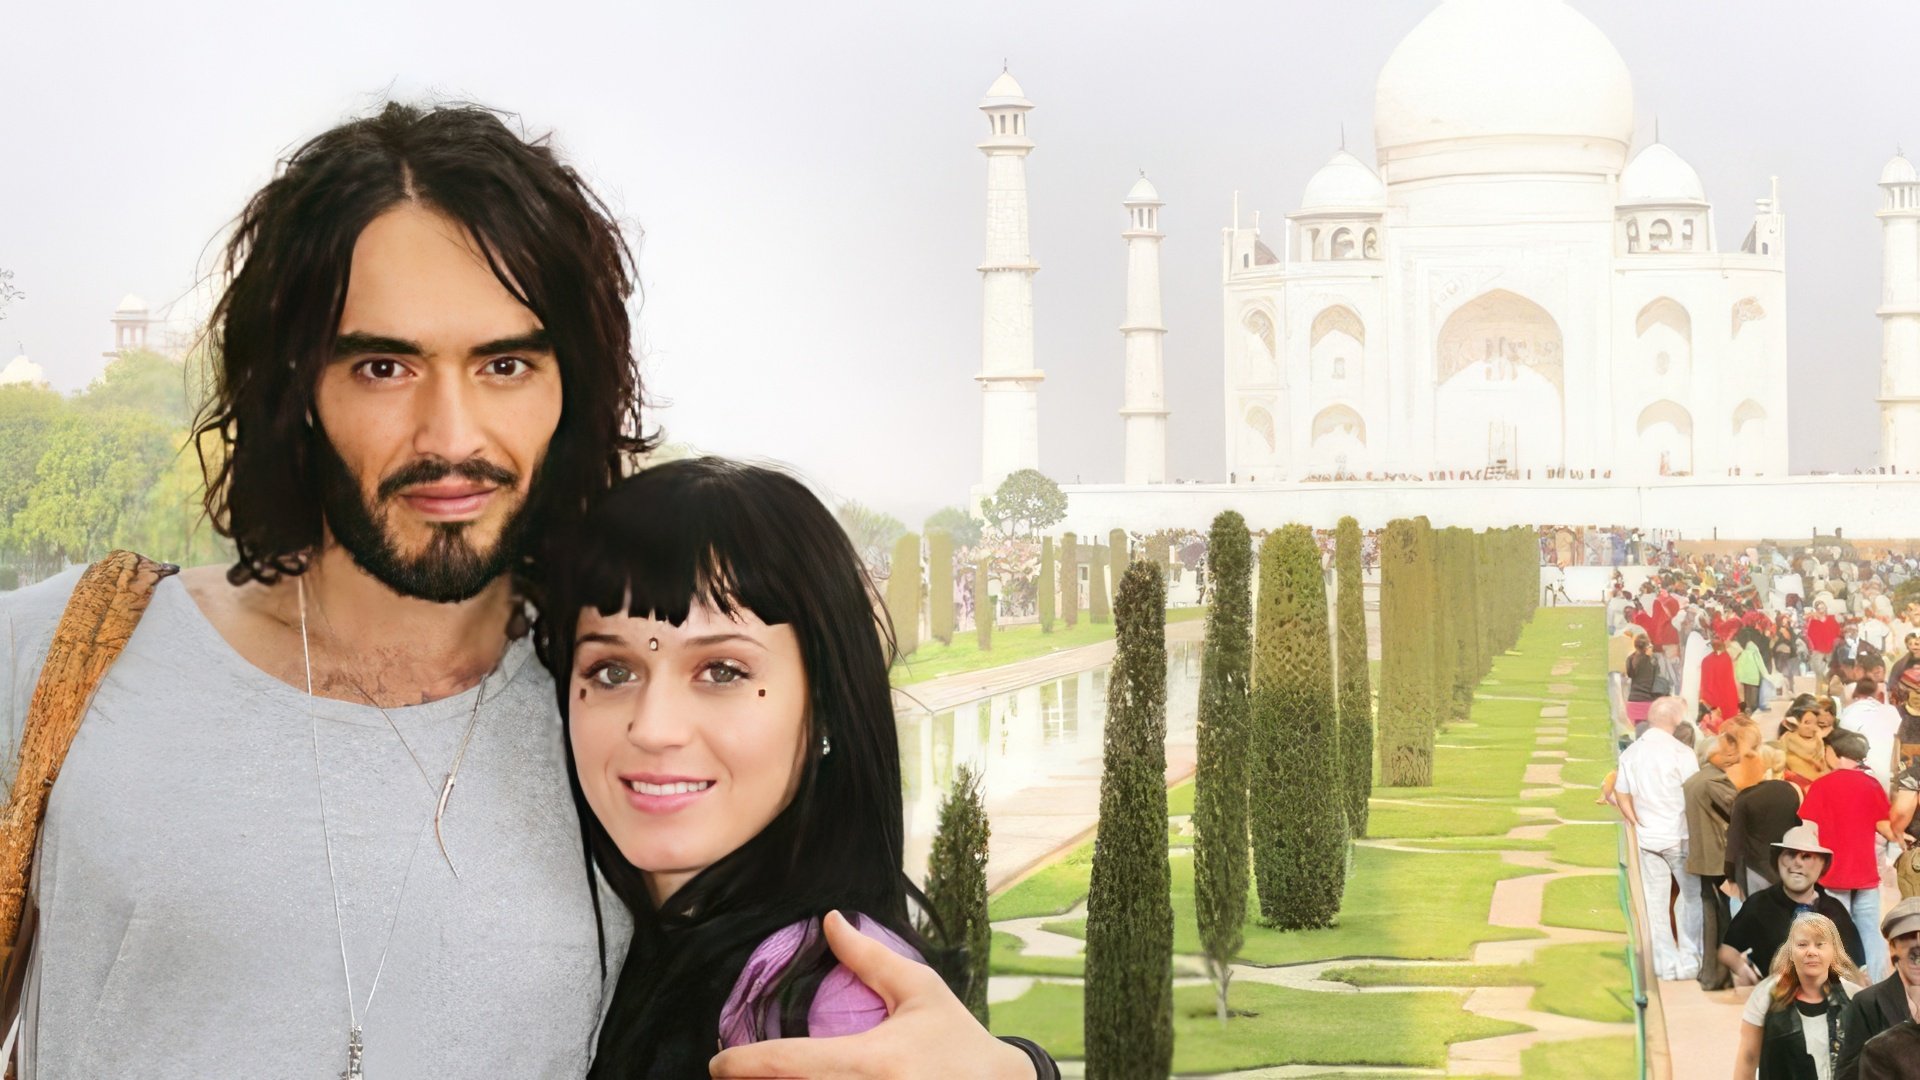 Katy and Russell got married in India